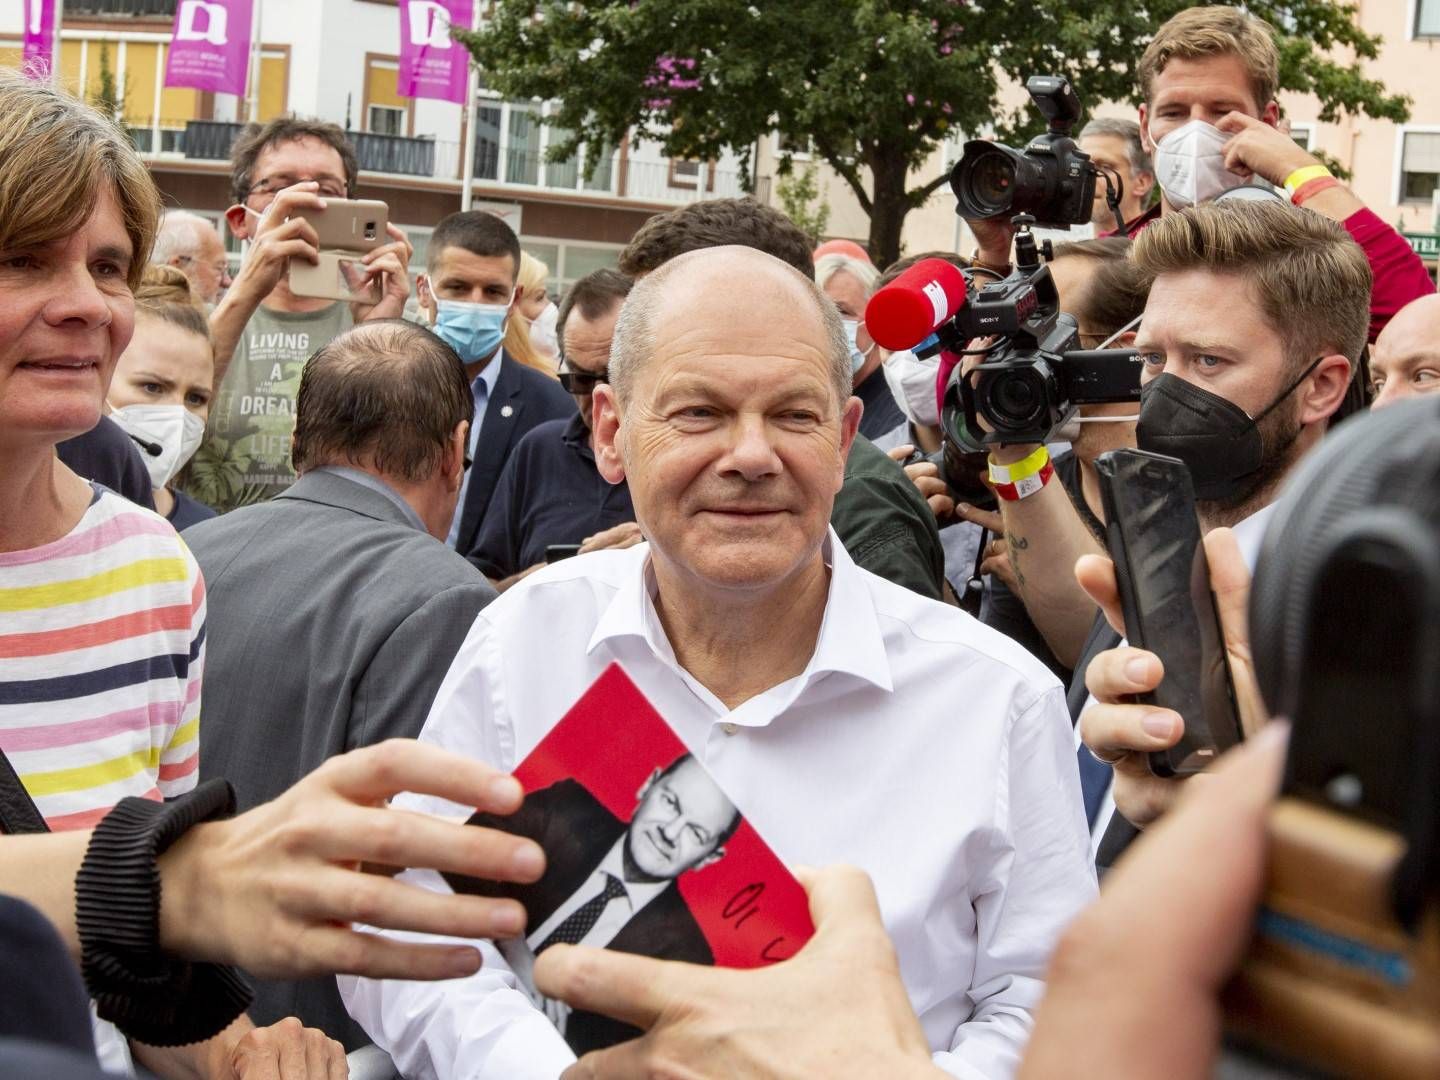 Olaf Scholz auf Wahlkampftour in Worms | Foto: picture alliance/dpa | View